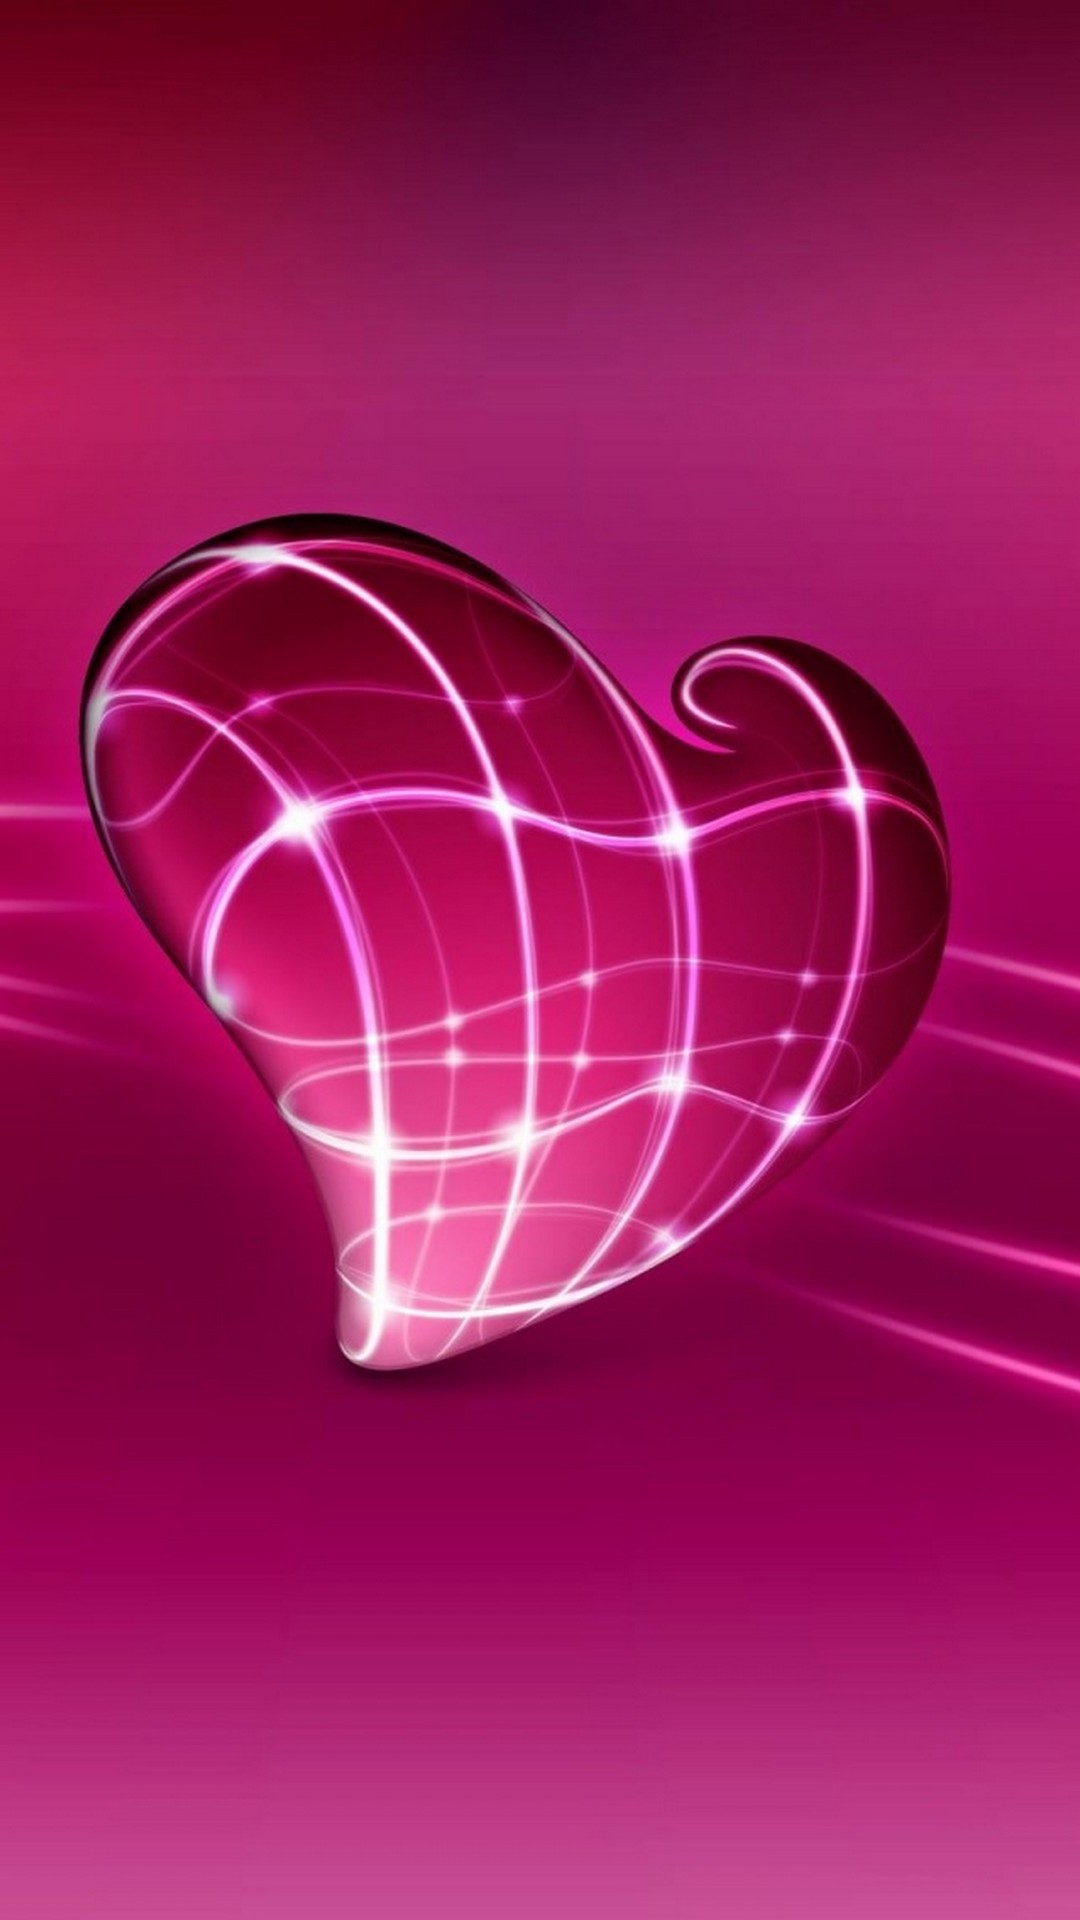 Pink Heart Android Wallpaper 3D - 2021 Android Wallpapers